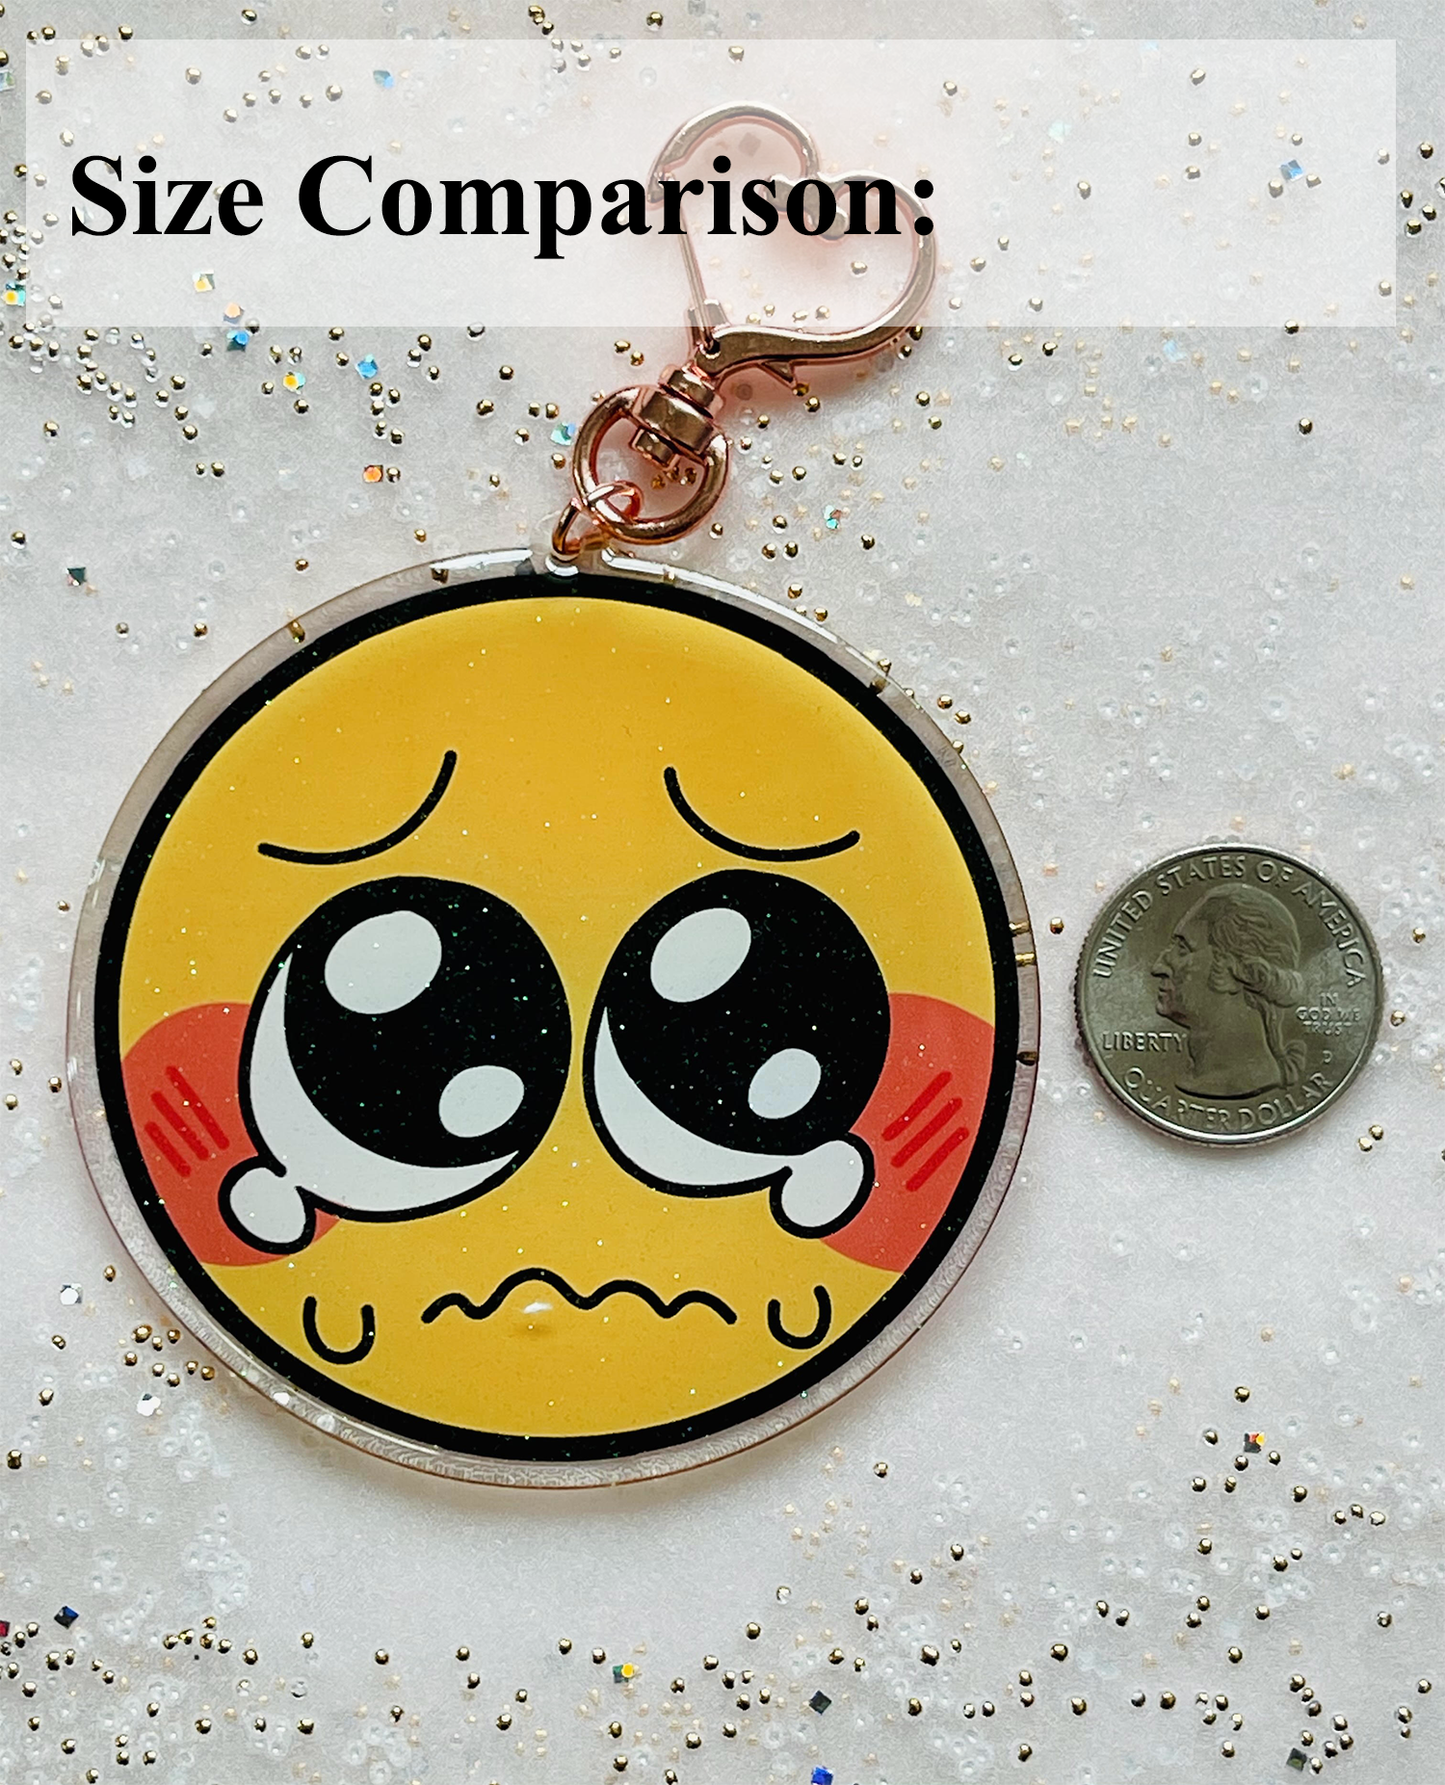 An acrylic charm shown next to a quarter as a size comparison. It is 3 times the size of the quarter.